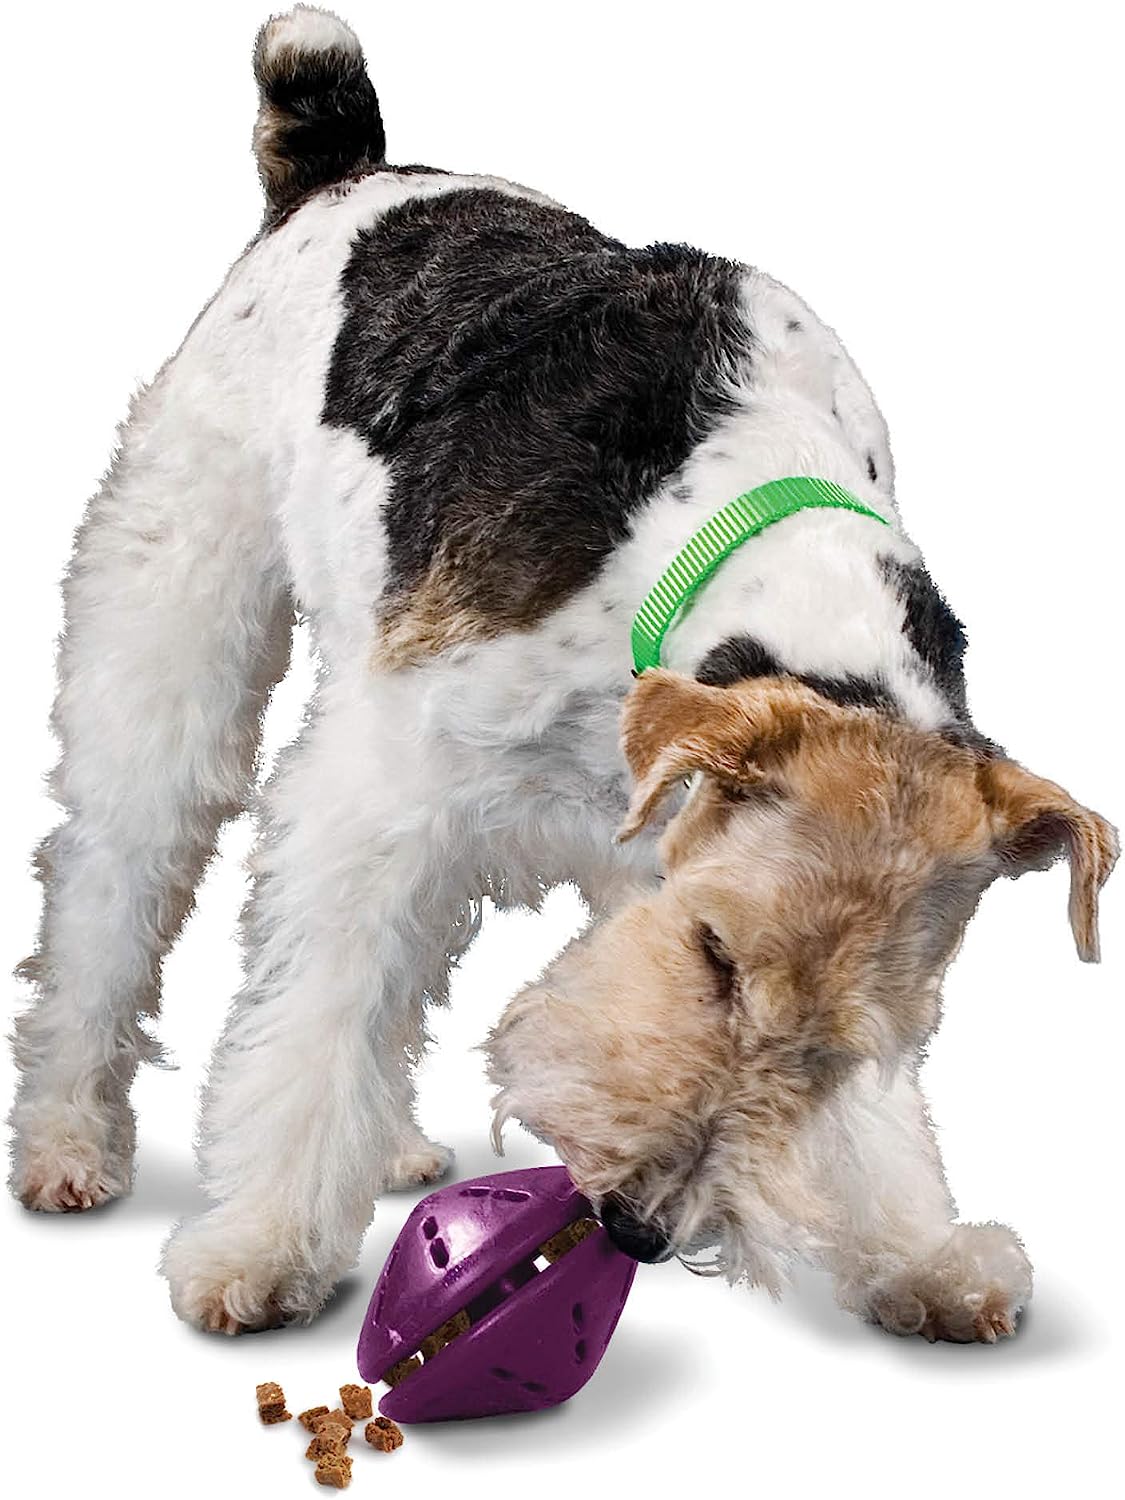 PetSafe Busy Buddy Tug-A-Jug Dog Toy, Slow Feeder and Trainer, Small 